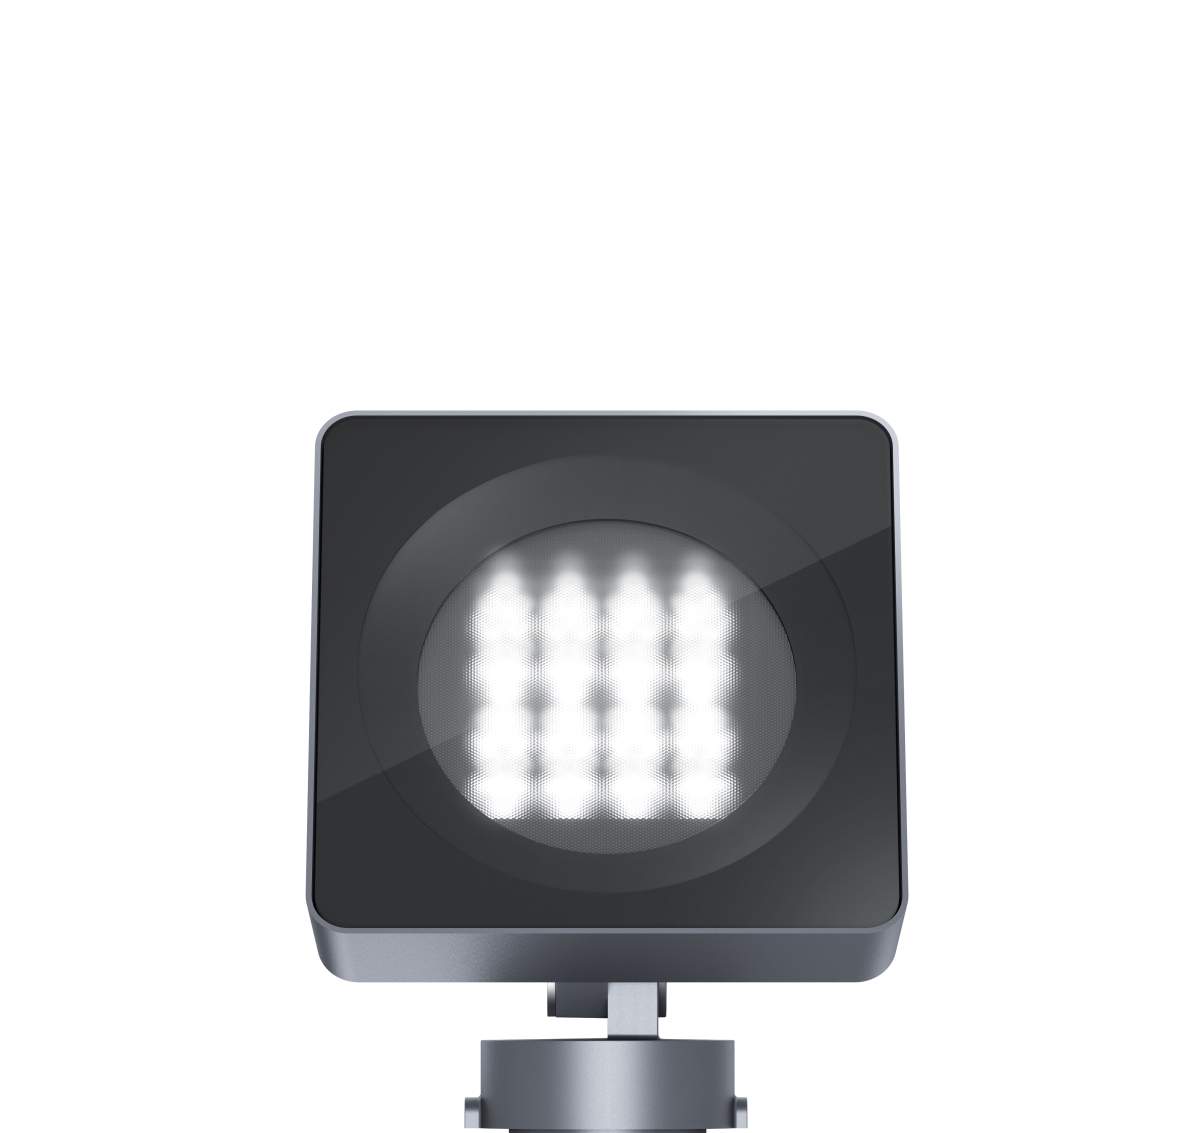 Lightscan IP65 Surf Mtd Floodlight With Mounting Plate Oval Flood Beam 48W LED 4000K DALI Graphit M